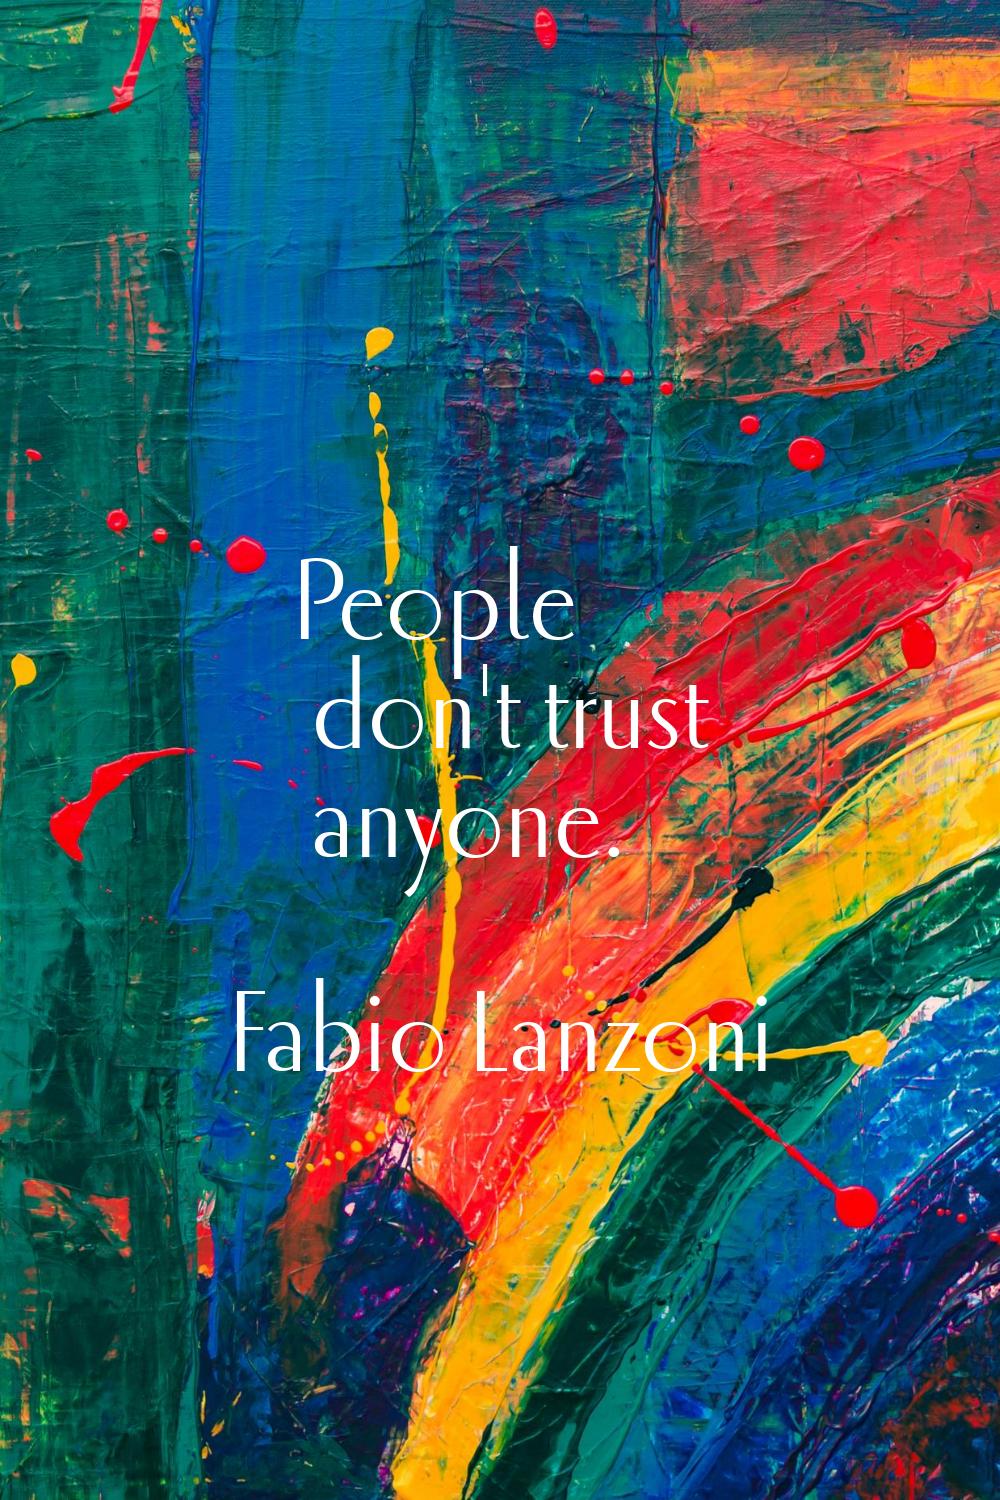 People don't trust anyone.